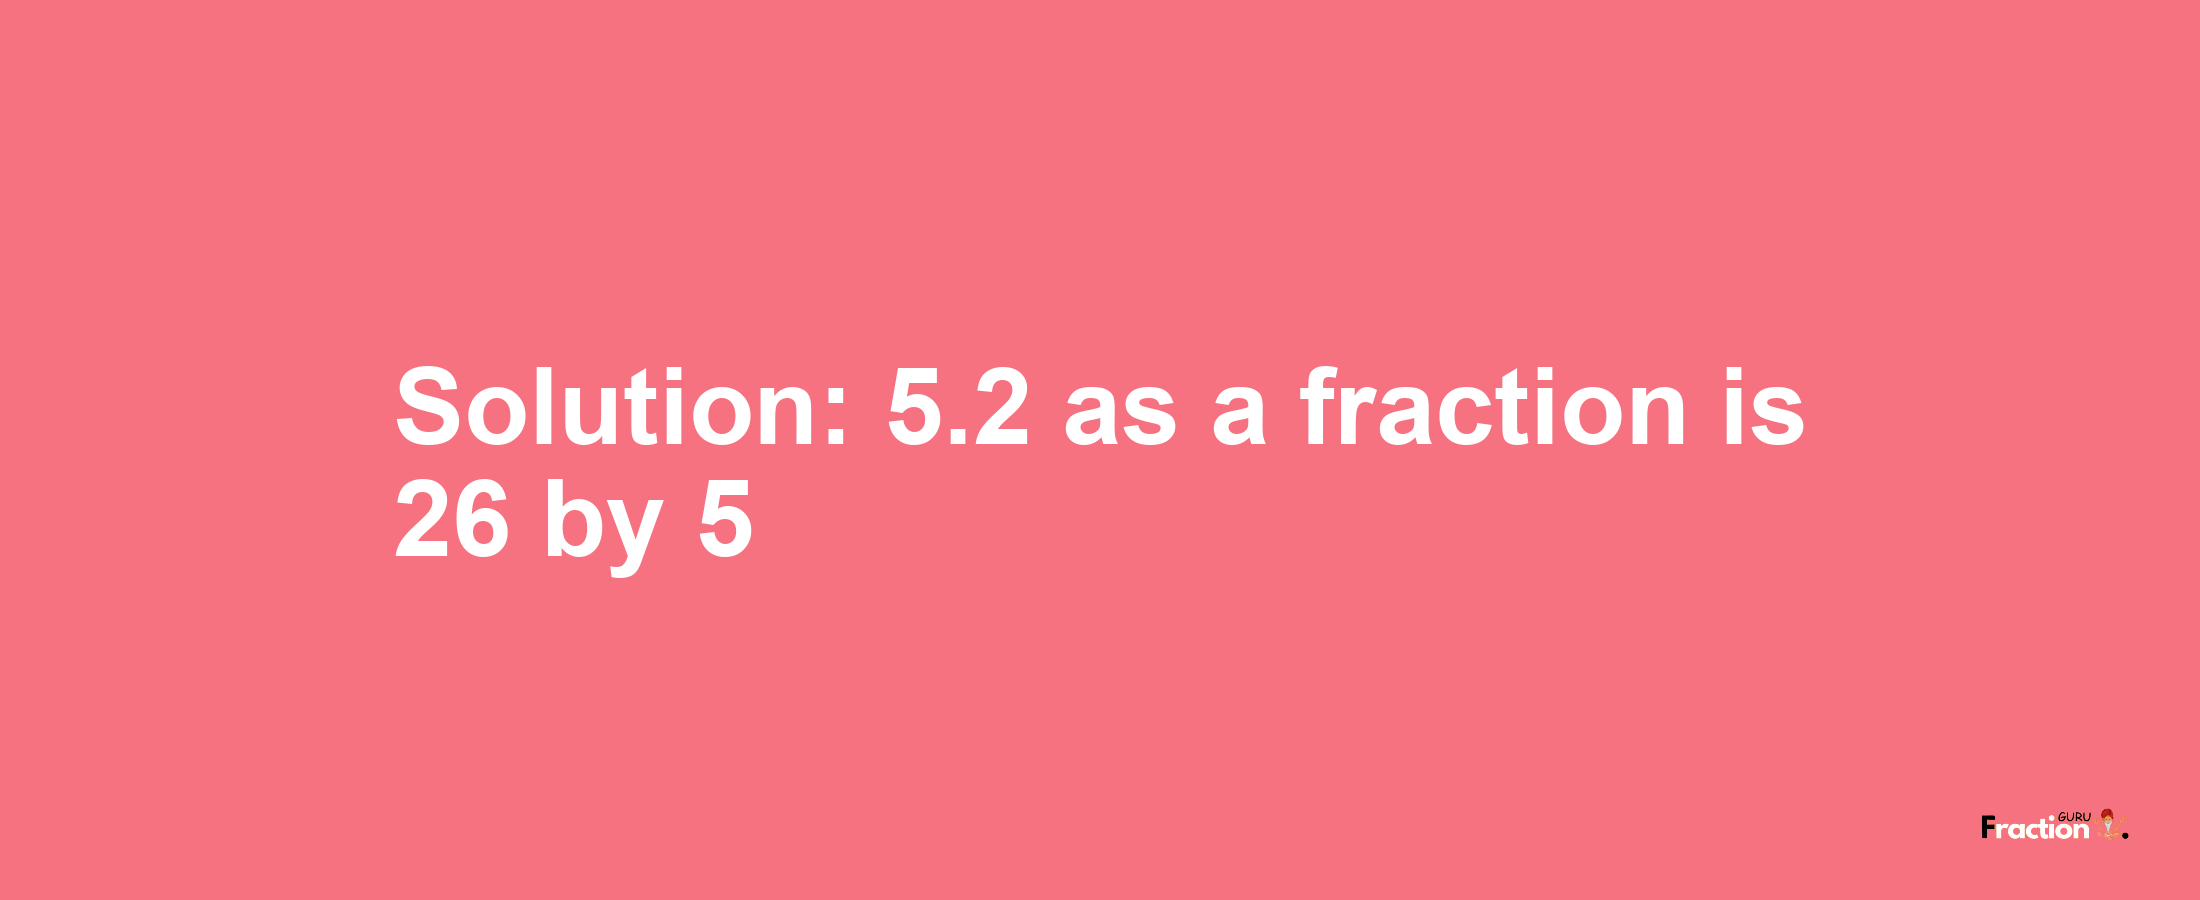 Solution:5.2 as a fraction is 26/5